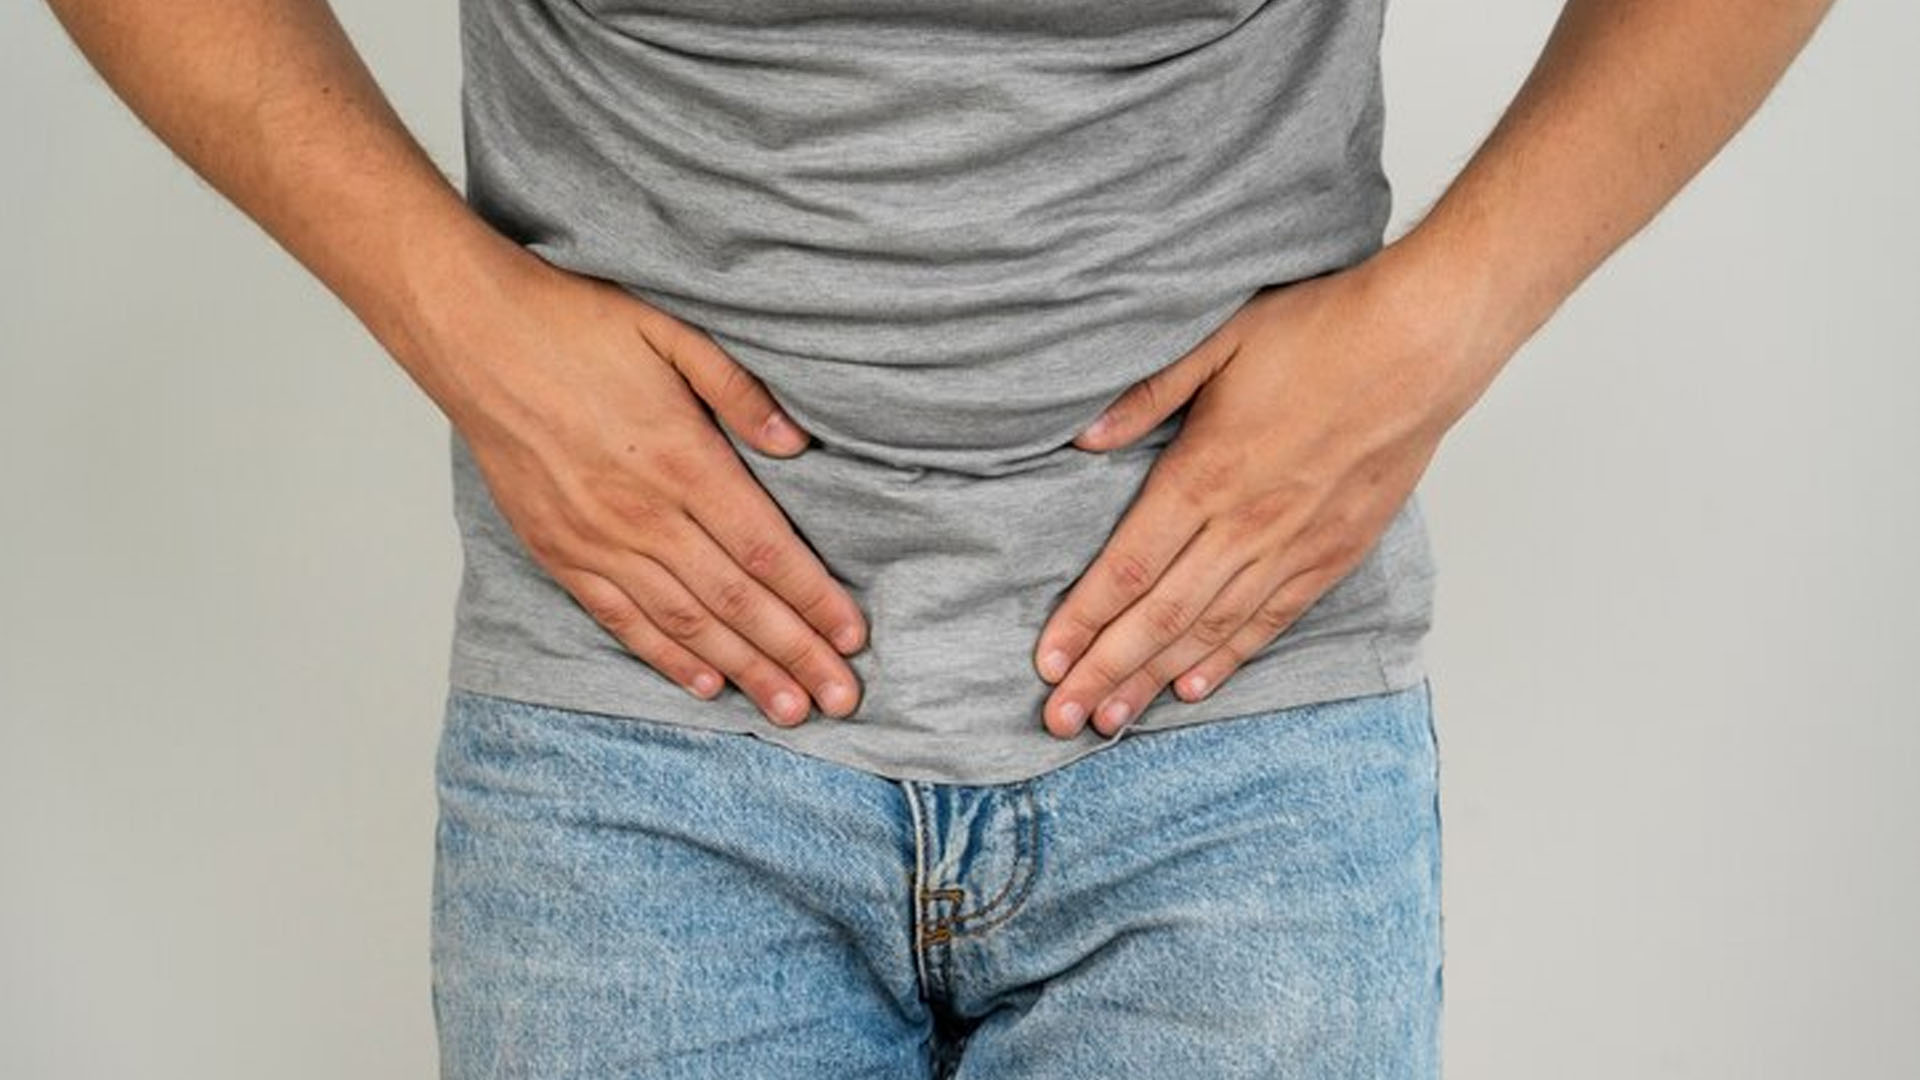 What are the Home Remedies to reduce Penis Itching?